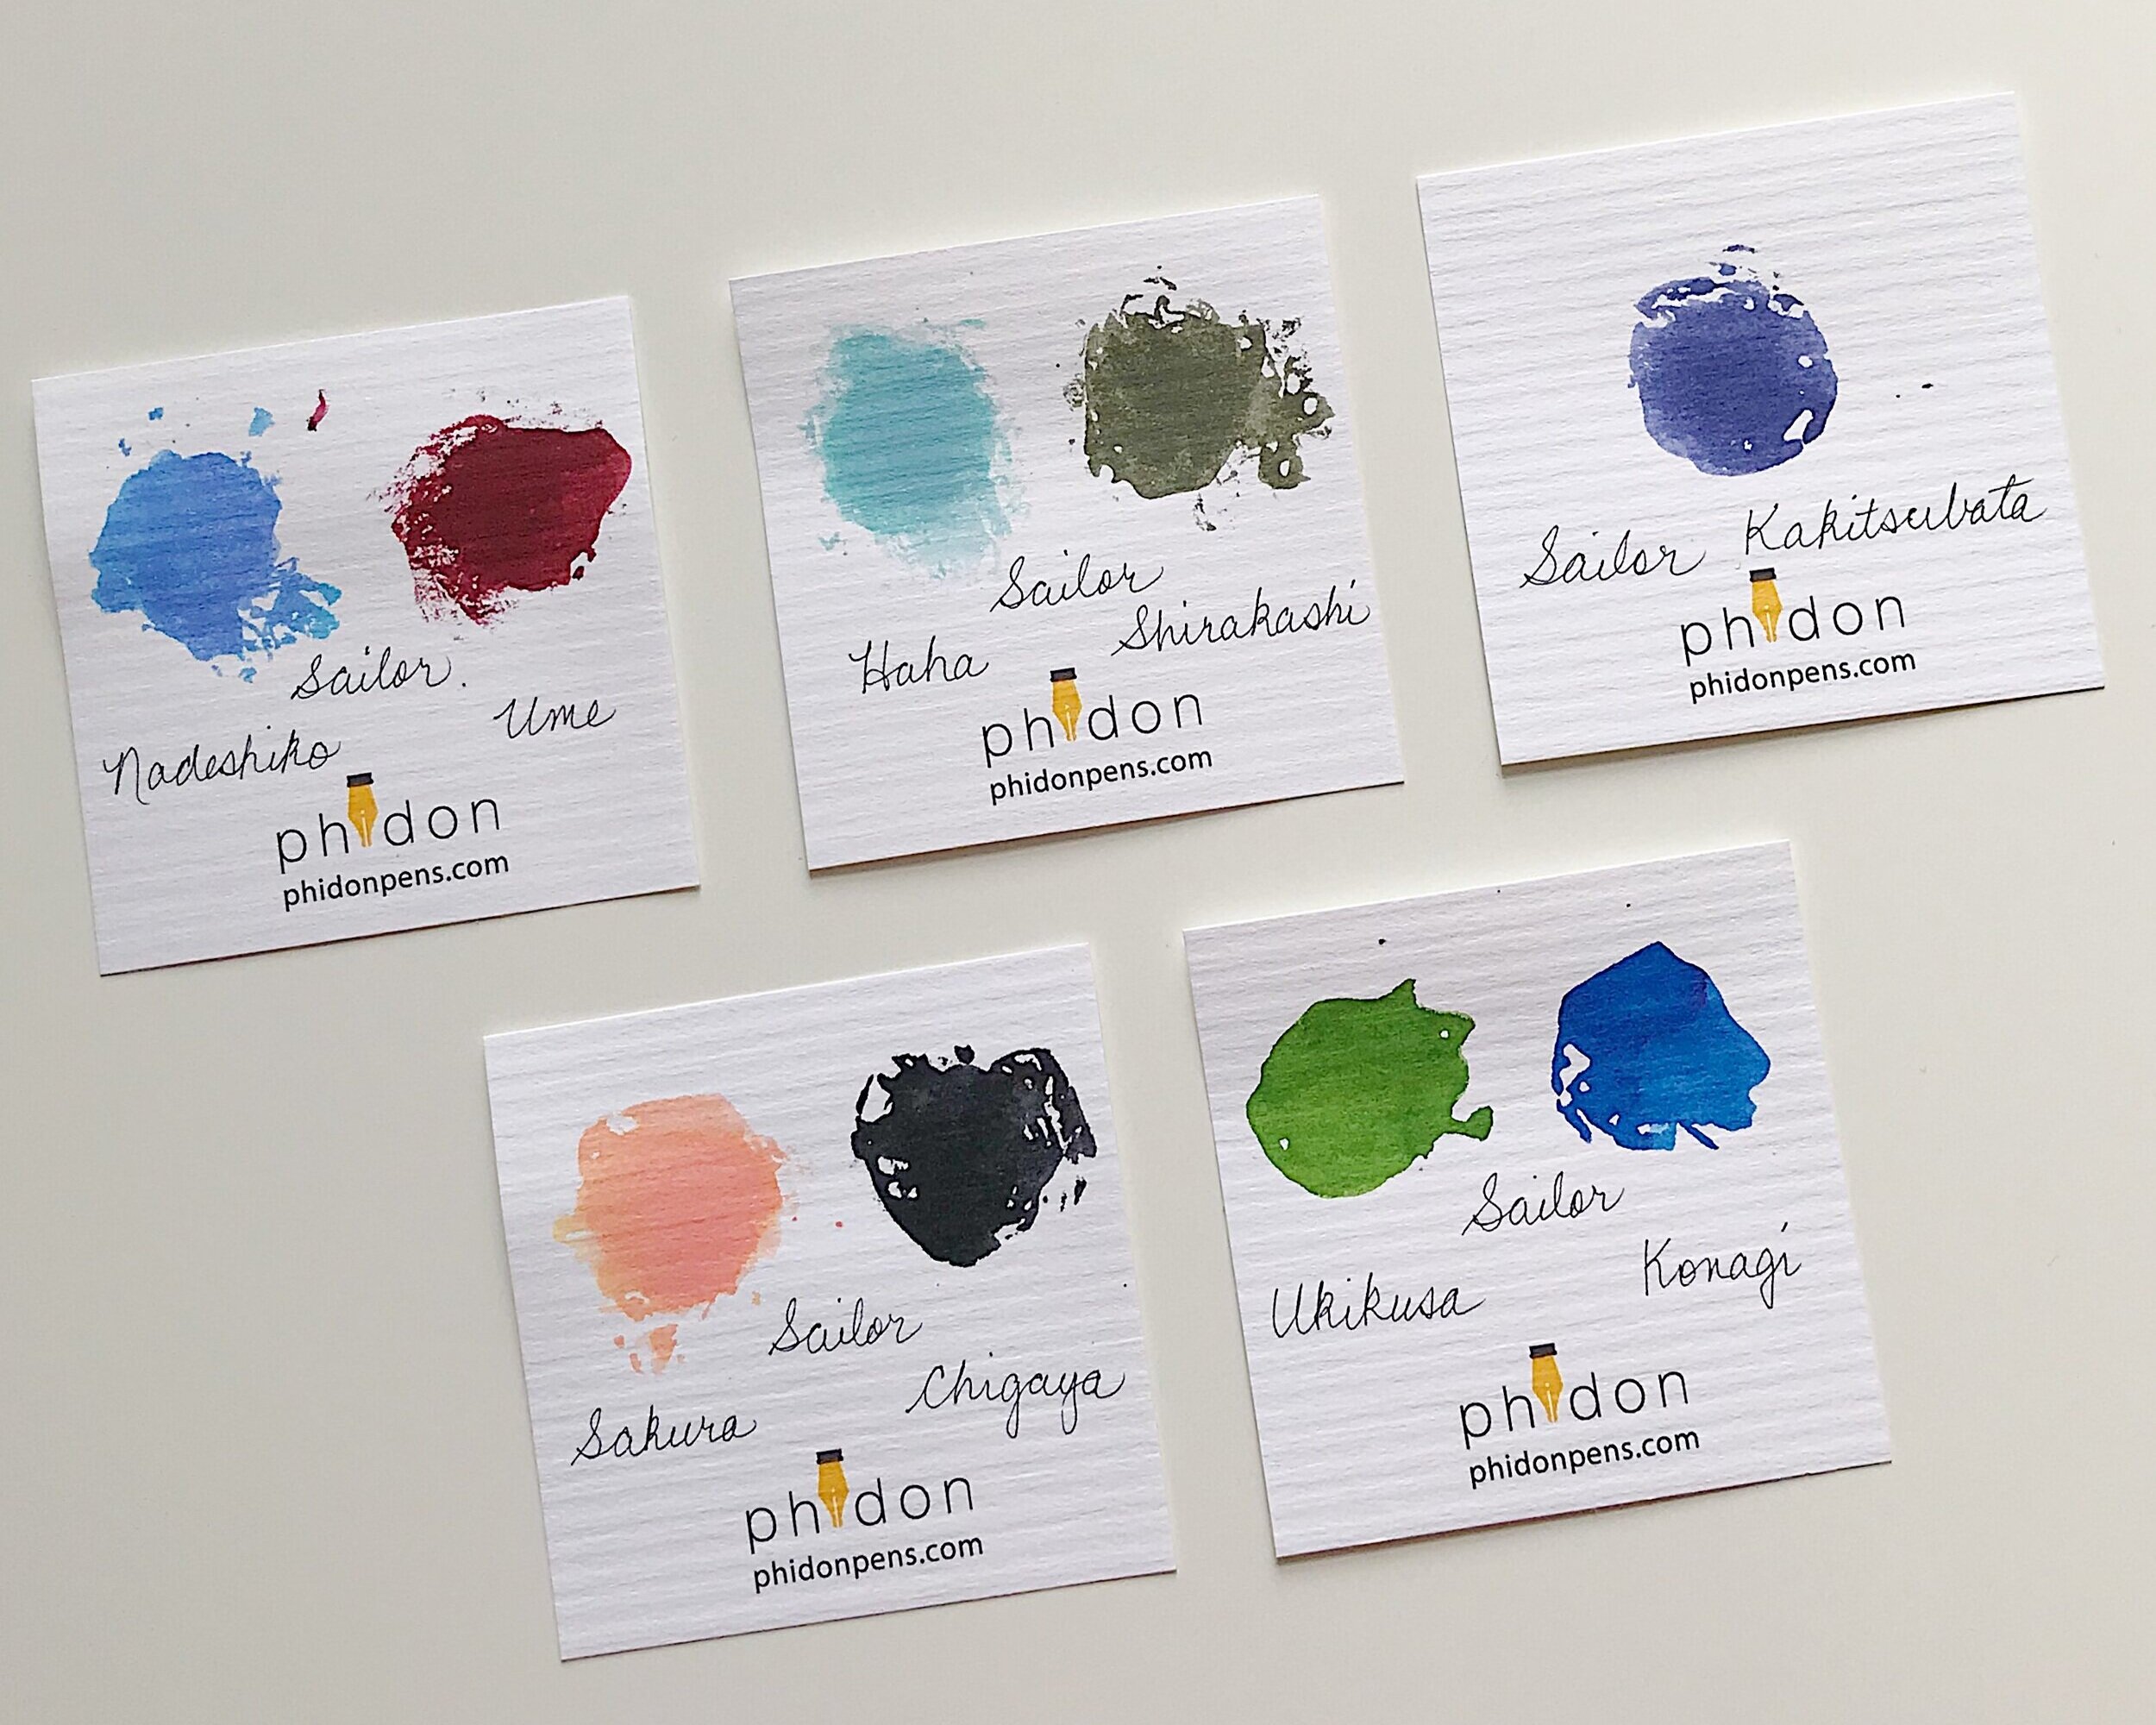 Ink Recipe Guide: Fall Colors